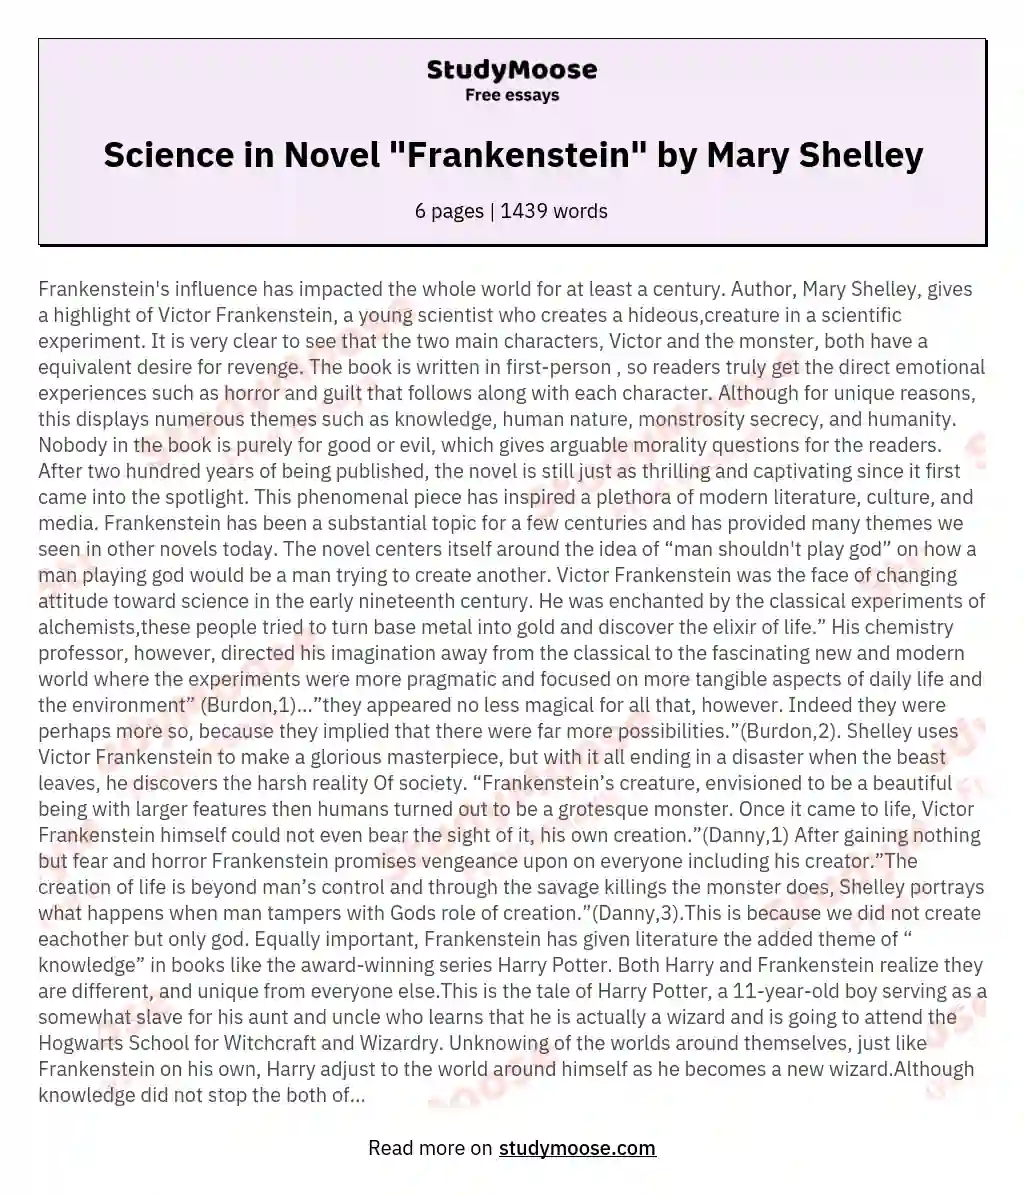 Science in Novel "Frankenstein" by Mary Shelley essay